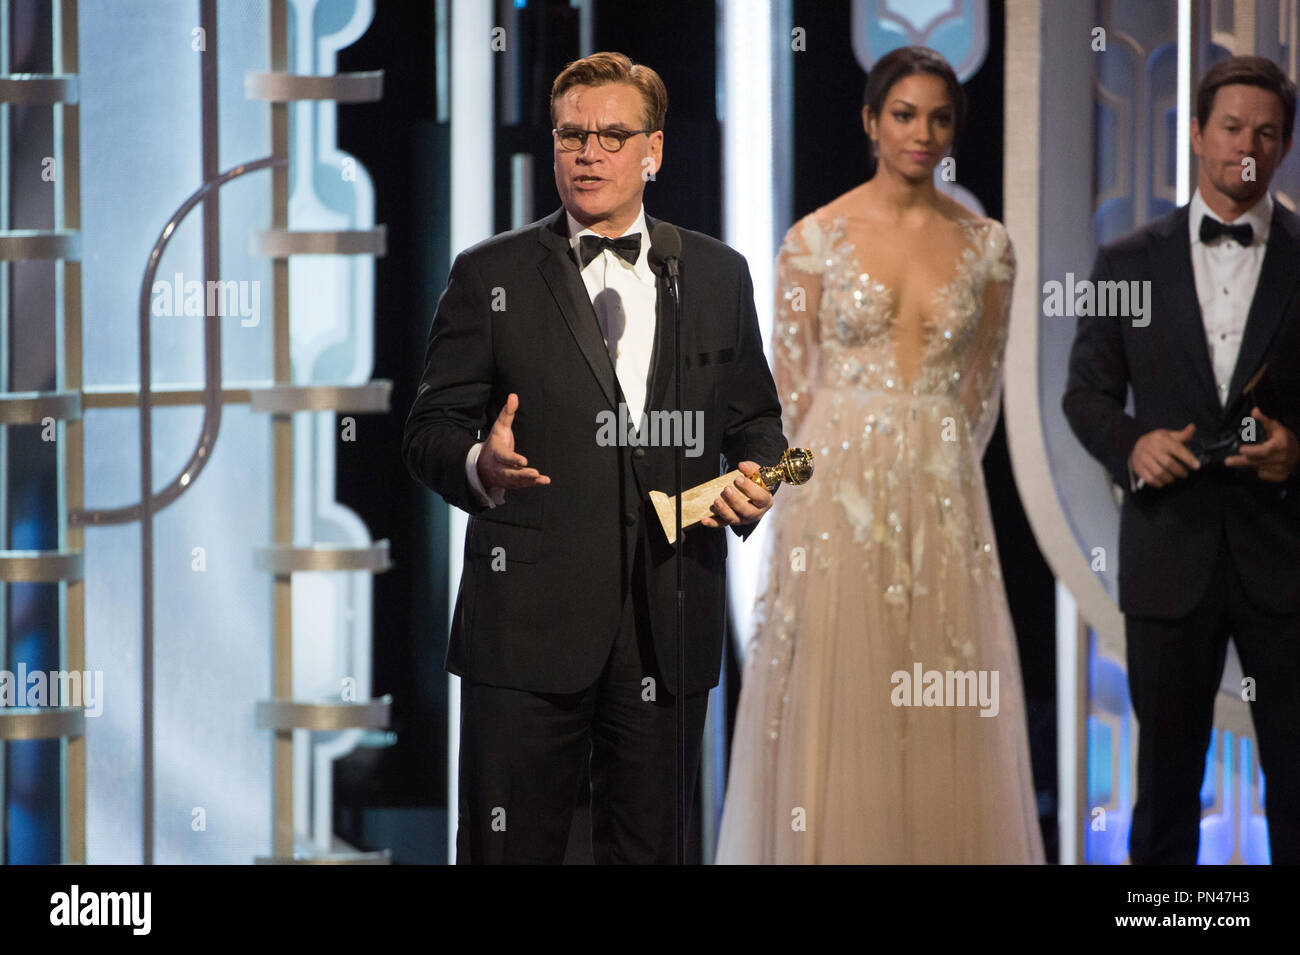 The Golden Globe is awarded to Aaron Sorkin for BEST SCREENPLAY – MOTION PICTURE for 'Steve Jobs' at the 73rd Annual Golden Globe Awards at the Beverly Hotel in Beverly Hills, CA on Sunday, January 10, 2016. Stock Photo